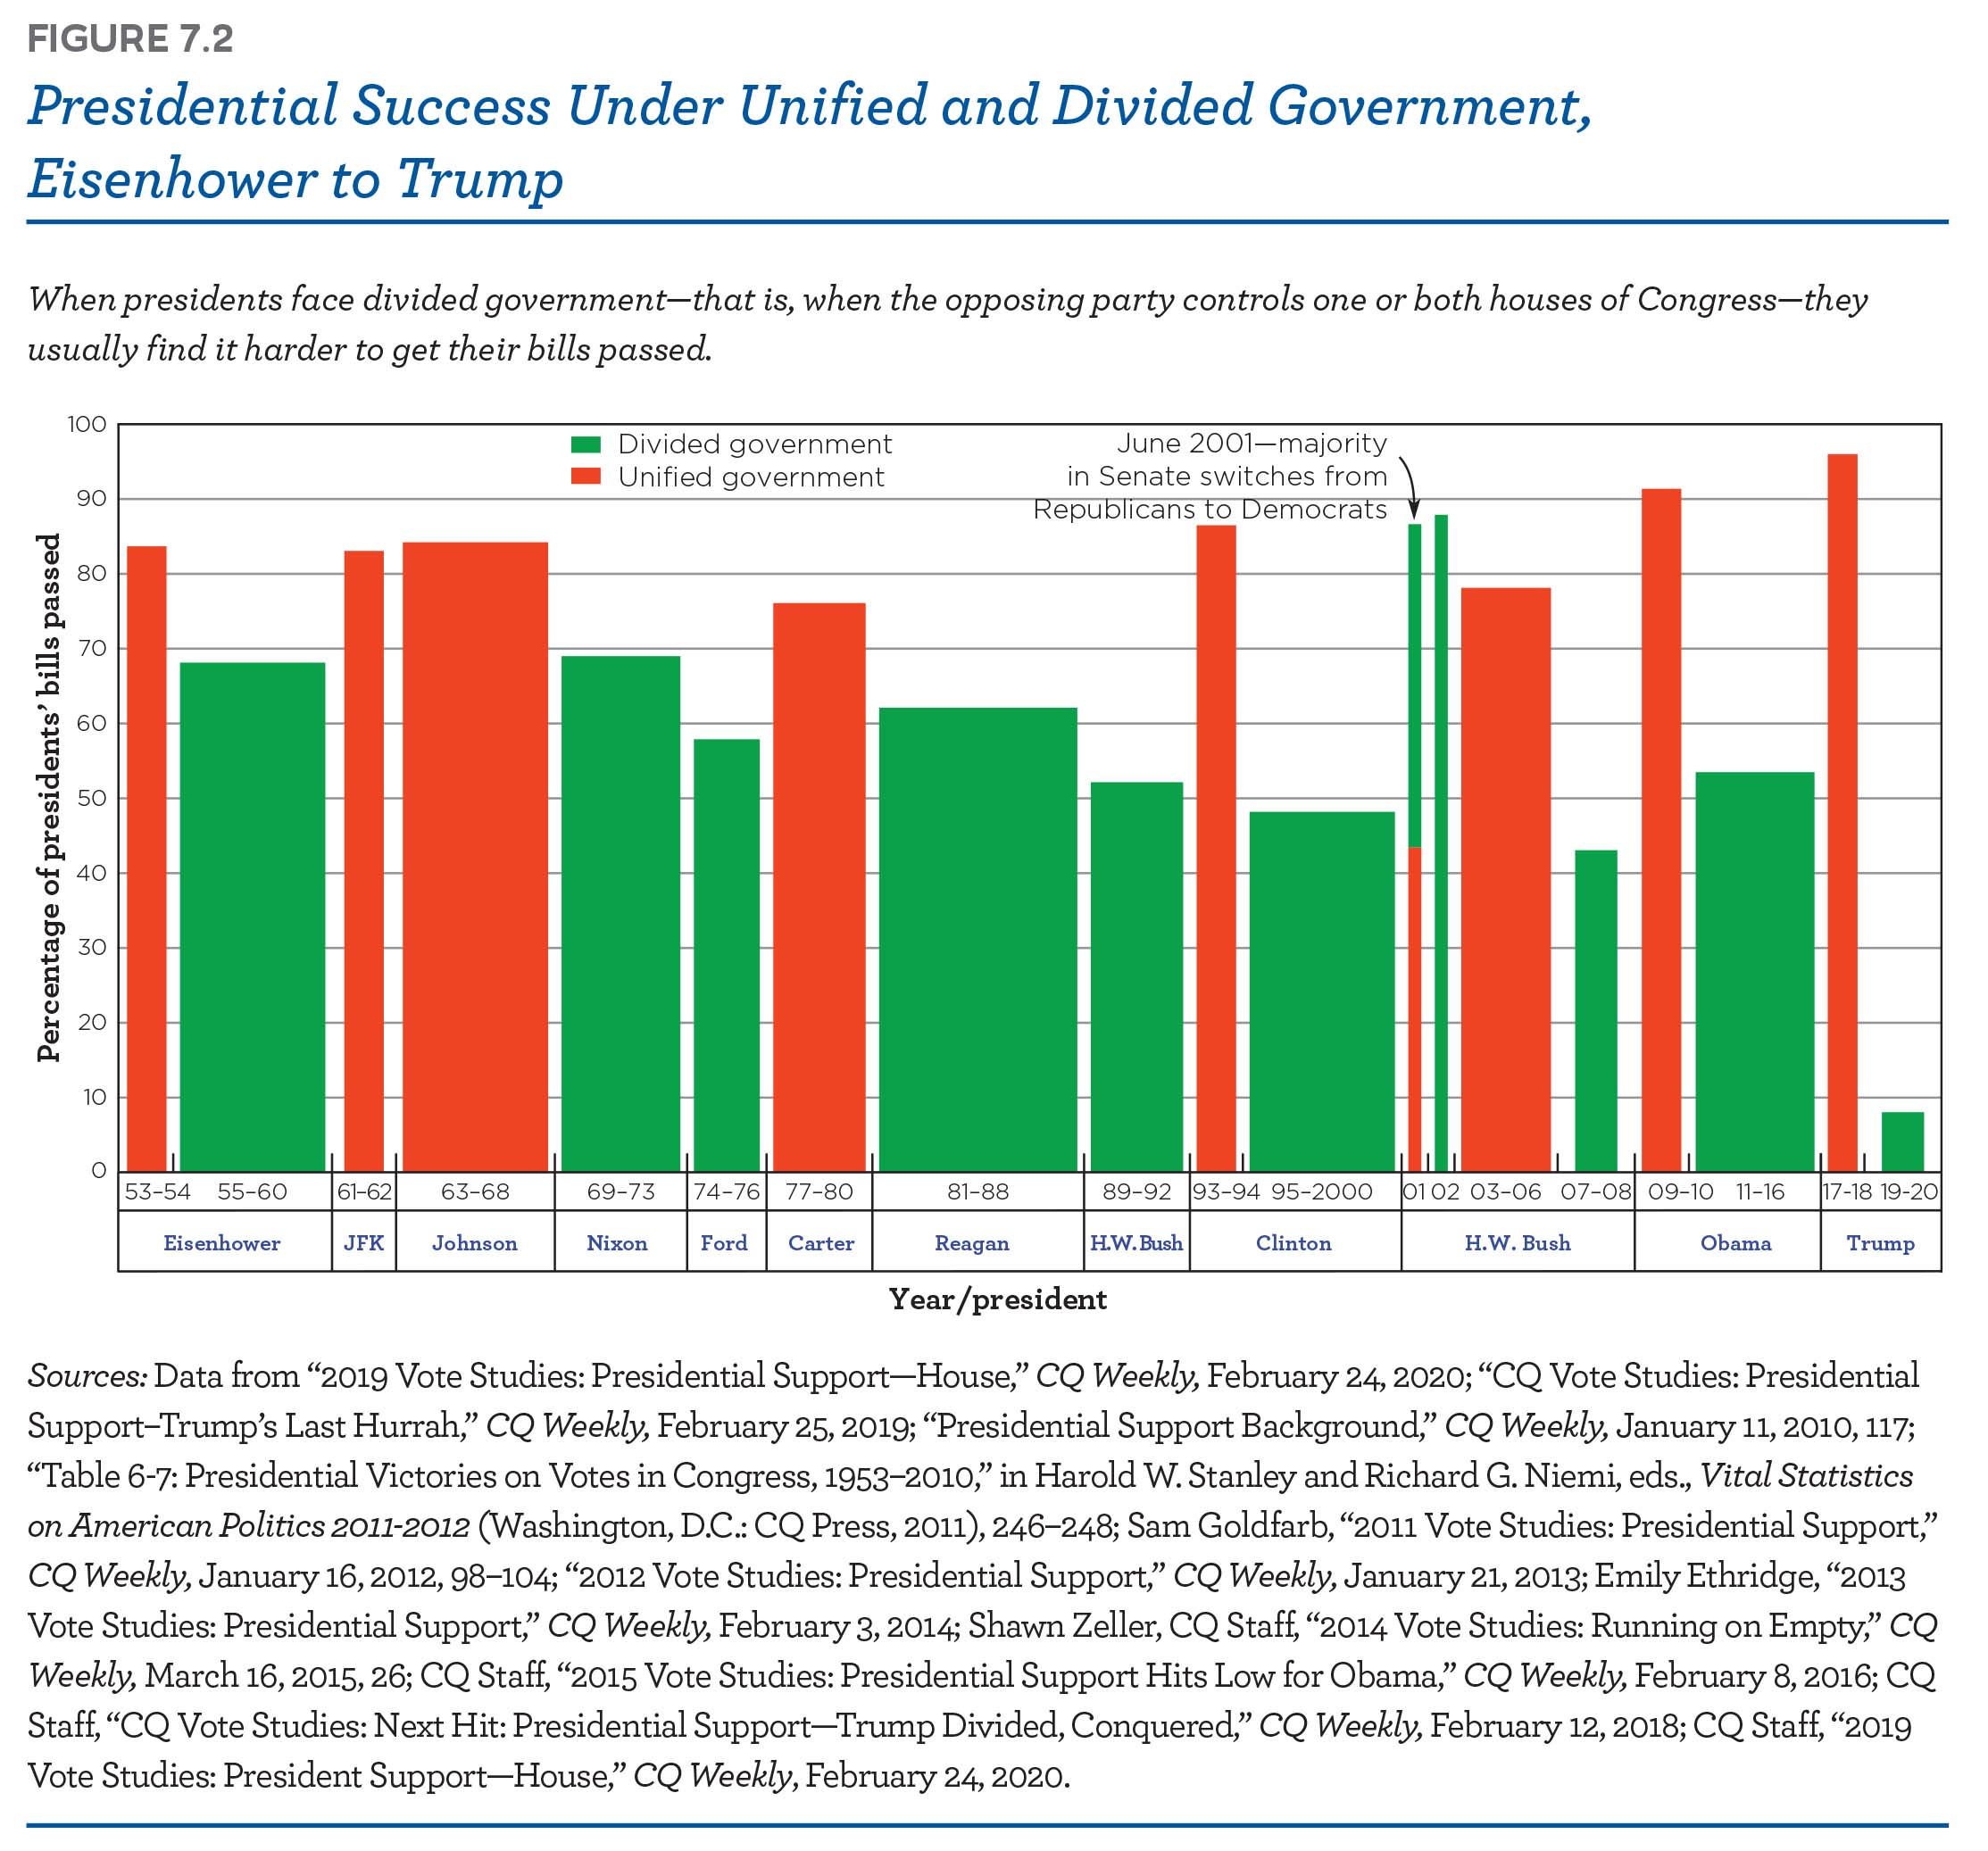 Presidential success under unified and divided government, from Eisenhower to trump